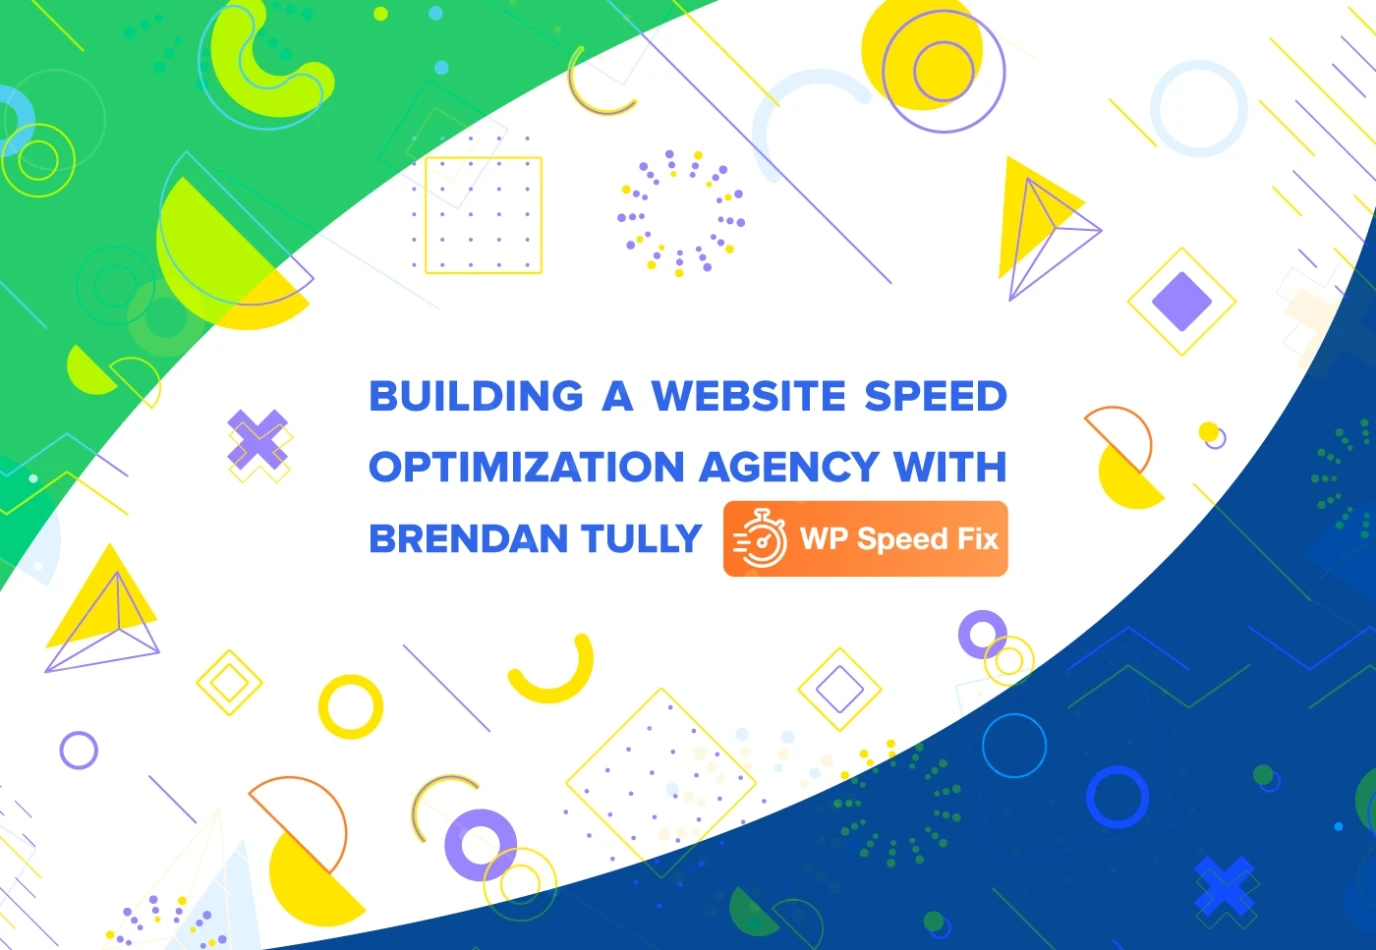 Building a Website Speed Optimization Agency With Brendan Tully